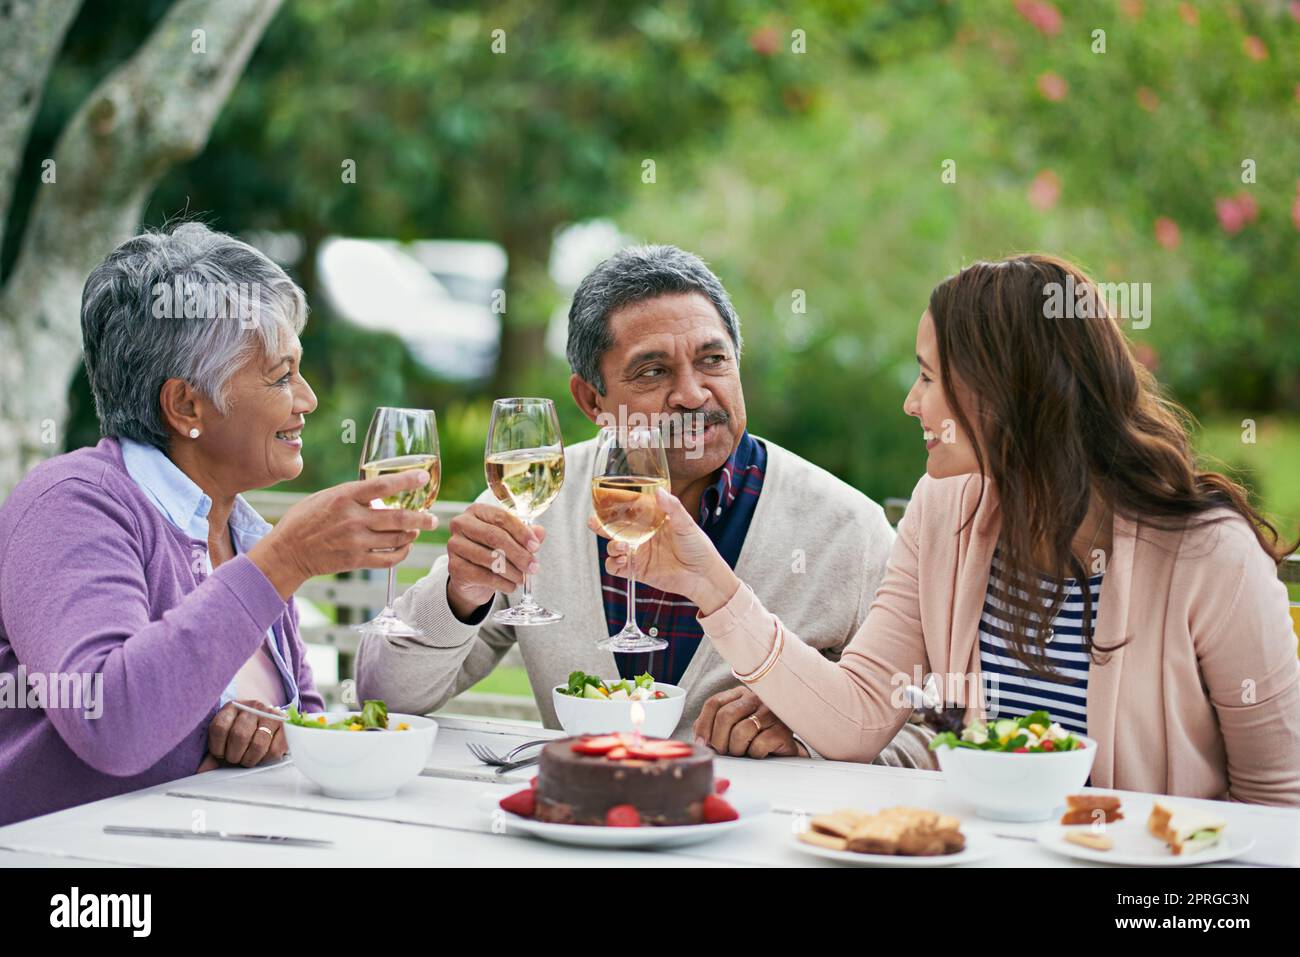 Another year of love, life and family. a family enjoying a birthday lunch outside. Stock Photo